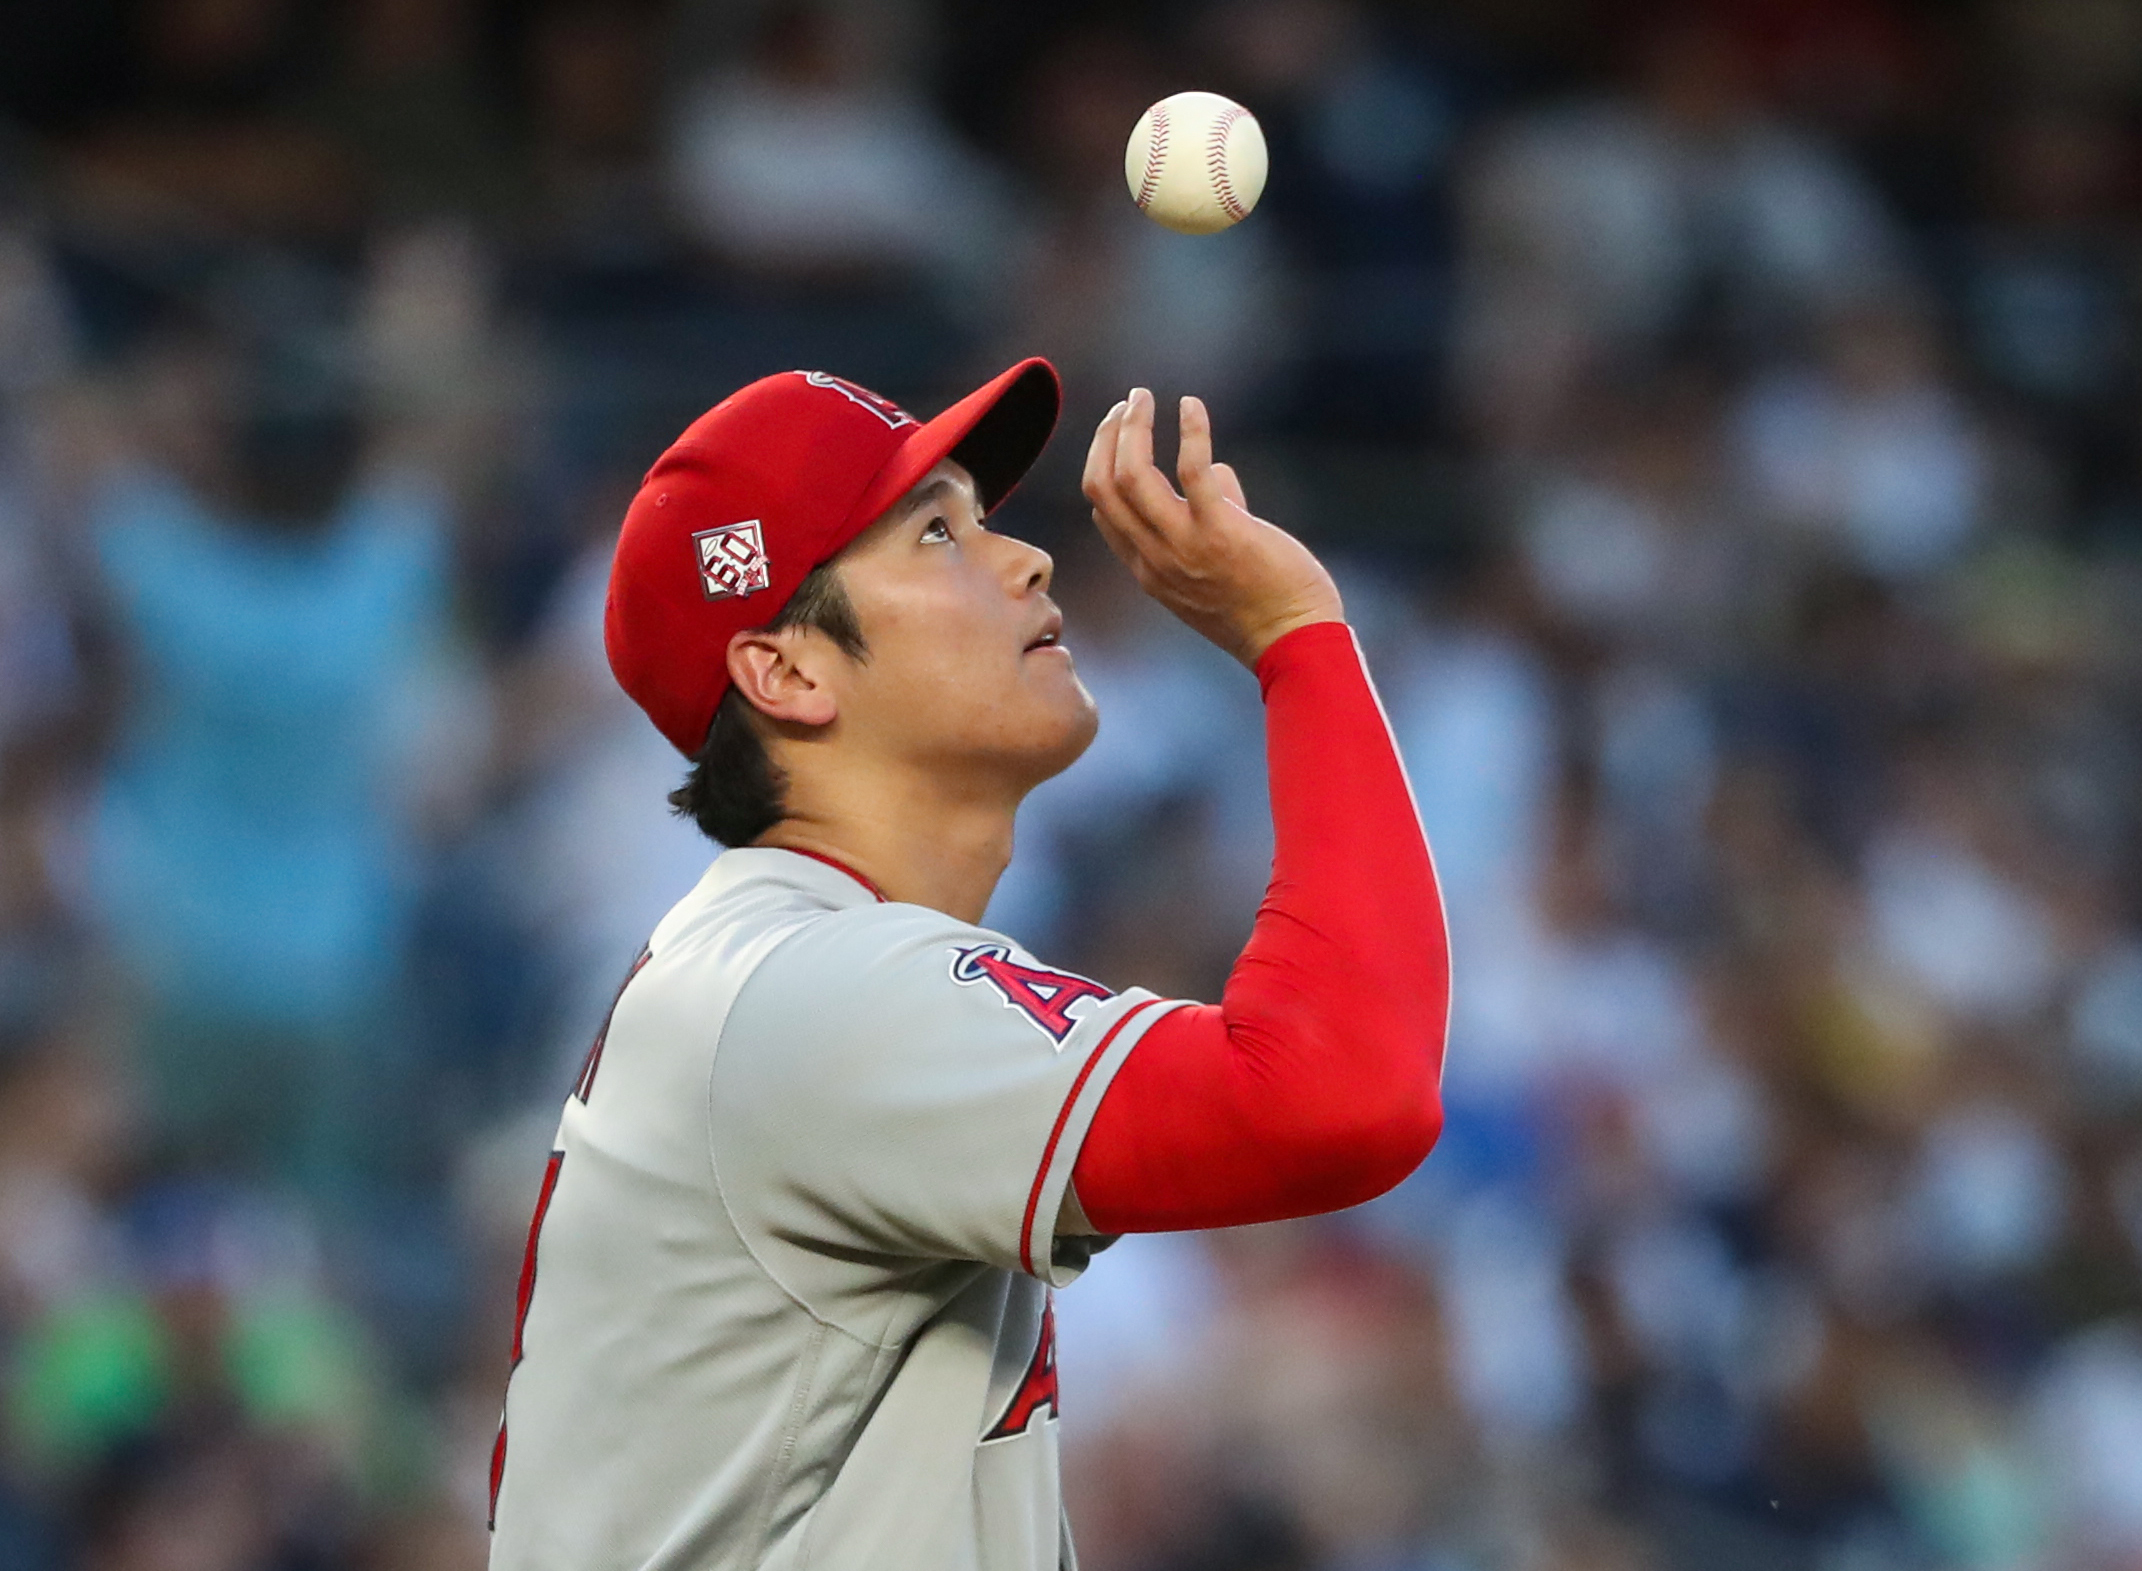 What Pros Wear: Shohei Ohtani's Asics Cleats (2019) - What Pros Wear